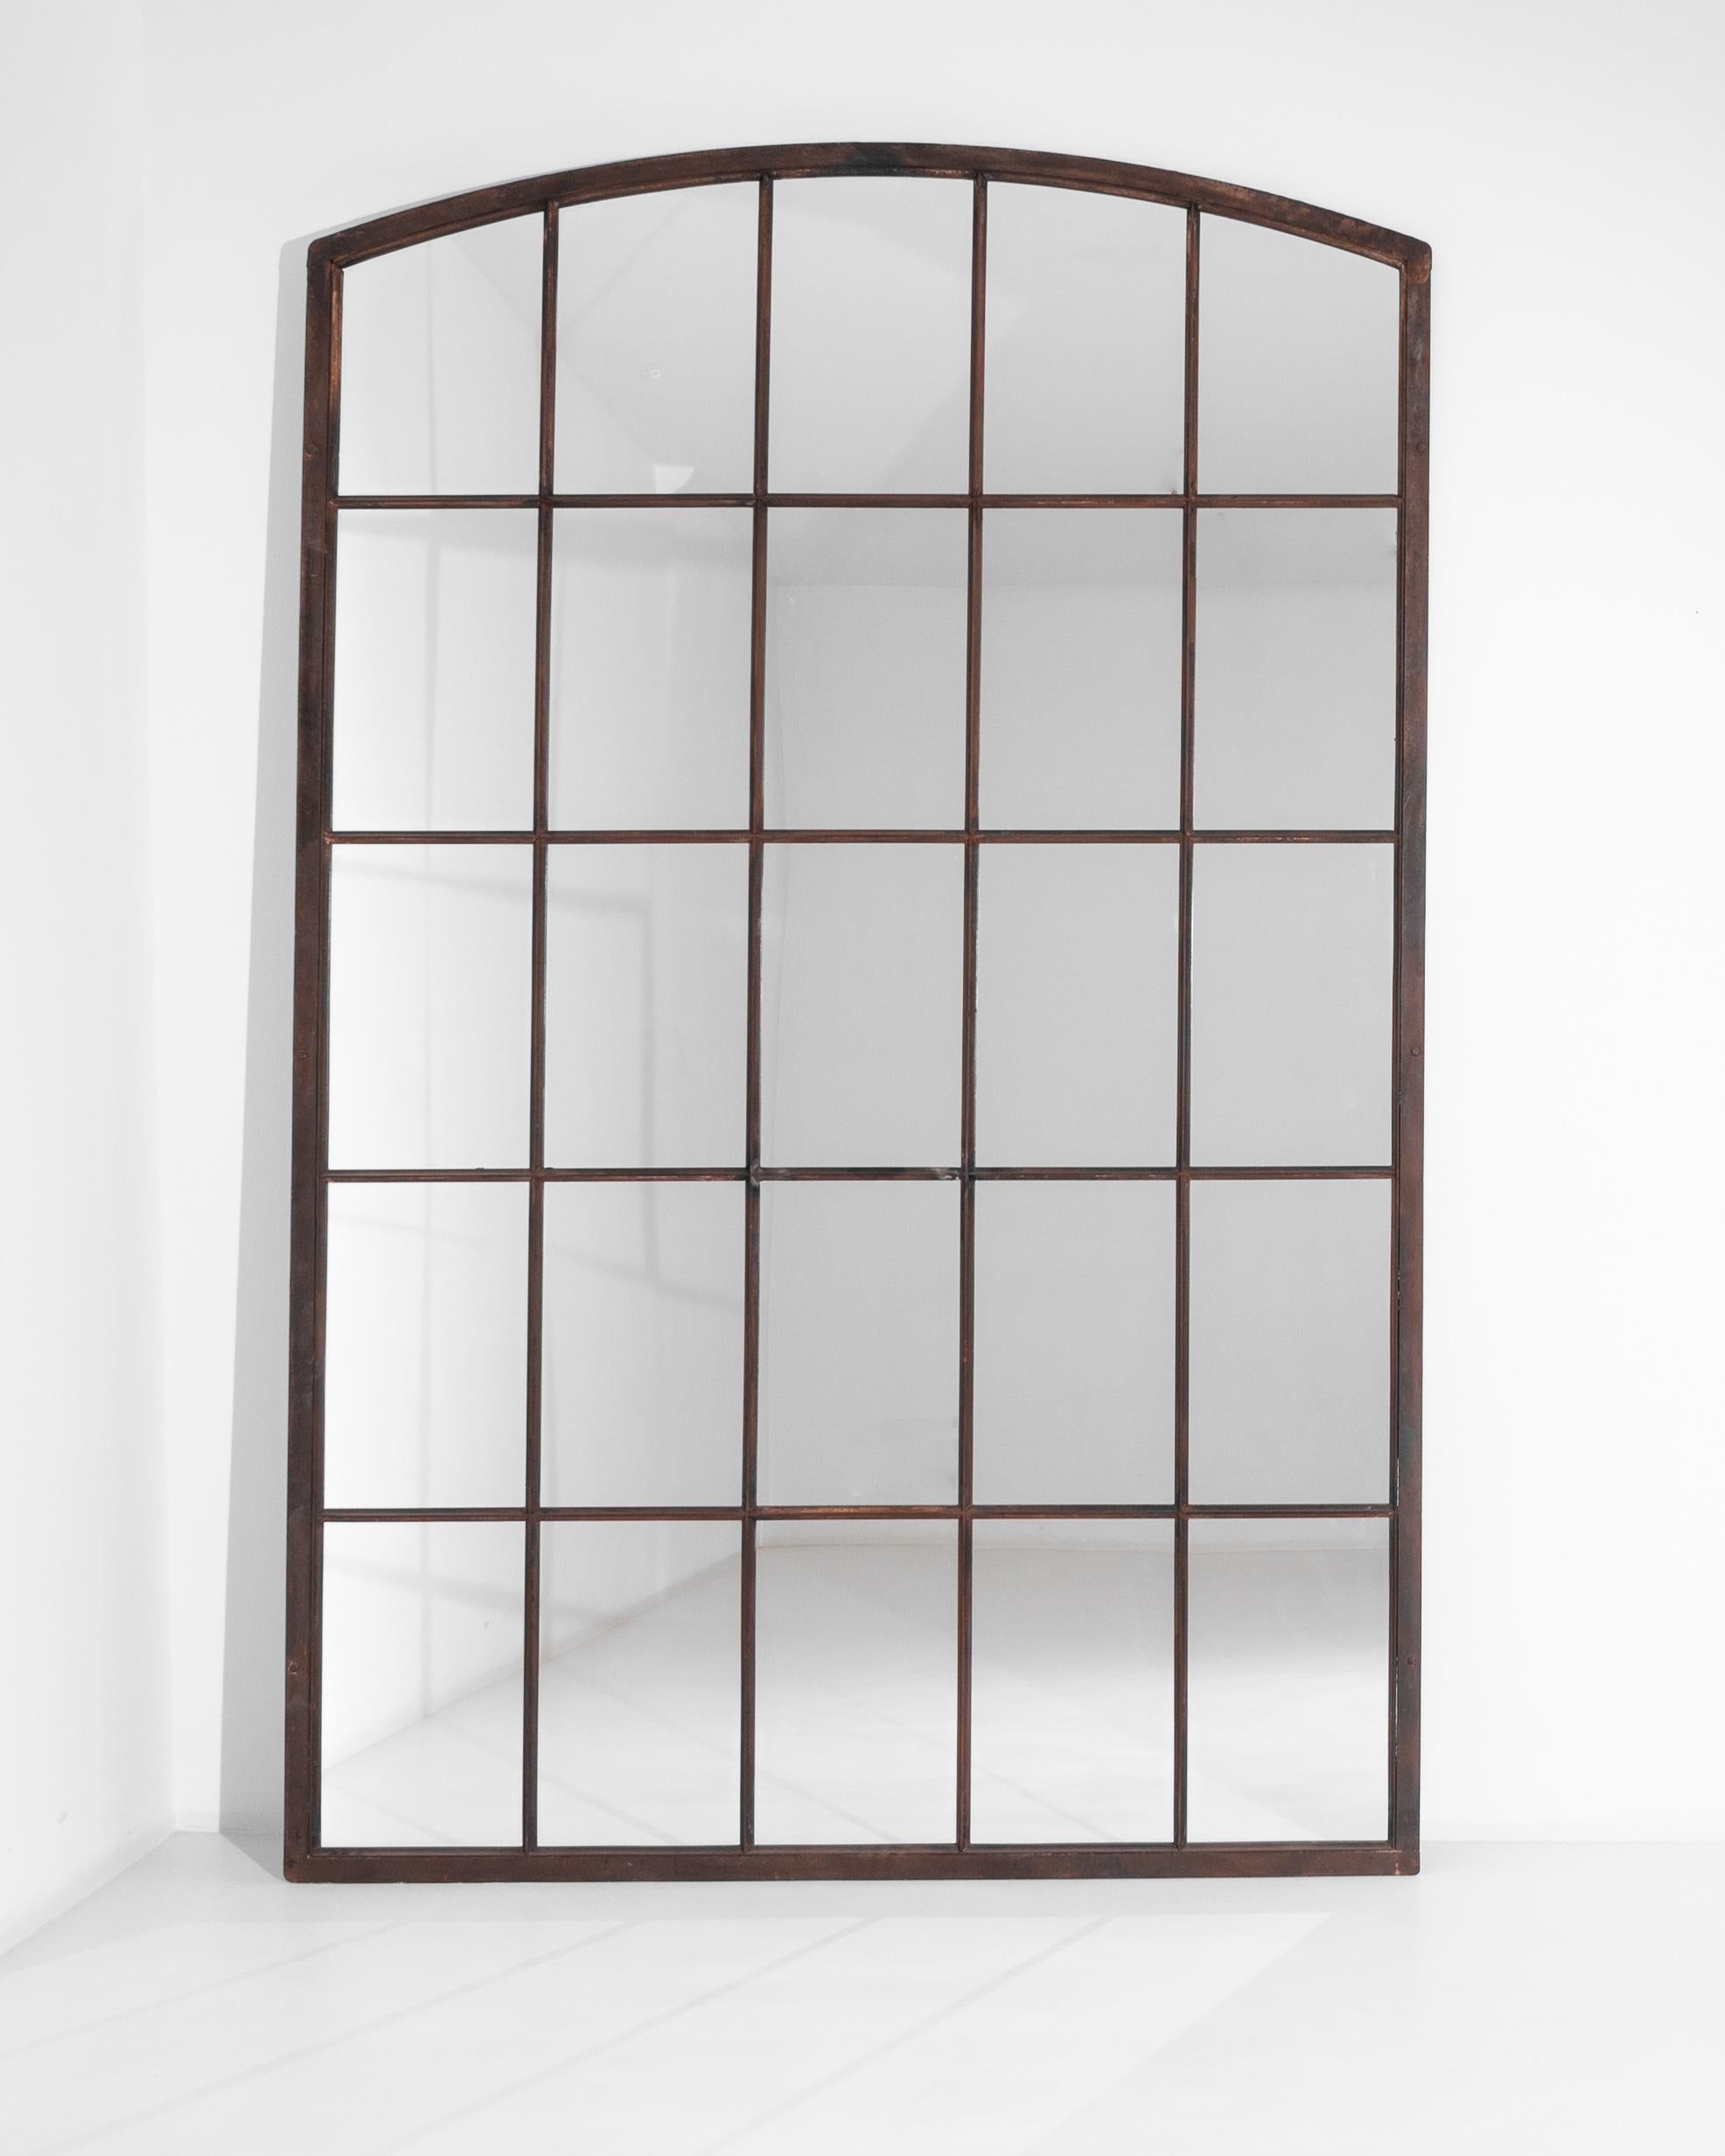 This antique metal mirror was produced in France, circa 1900. A tall mirror elevating above 100 inches, presenting a rectangular frame with a curved top. Mimicking a window structure, this sleek piece expands the perception of space through its